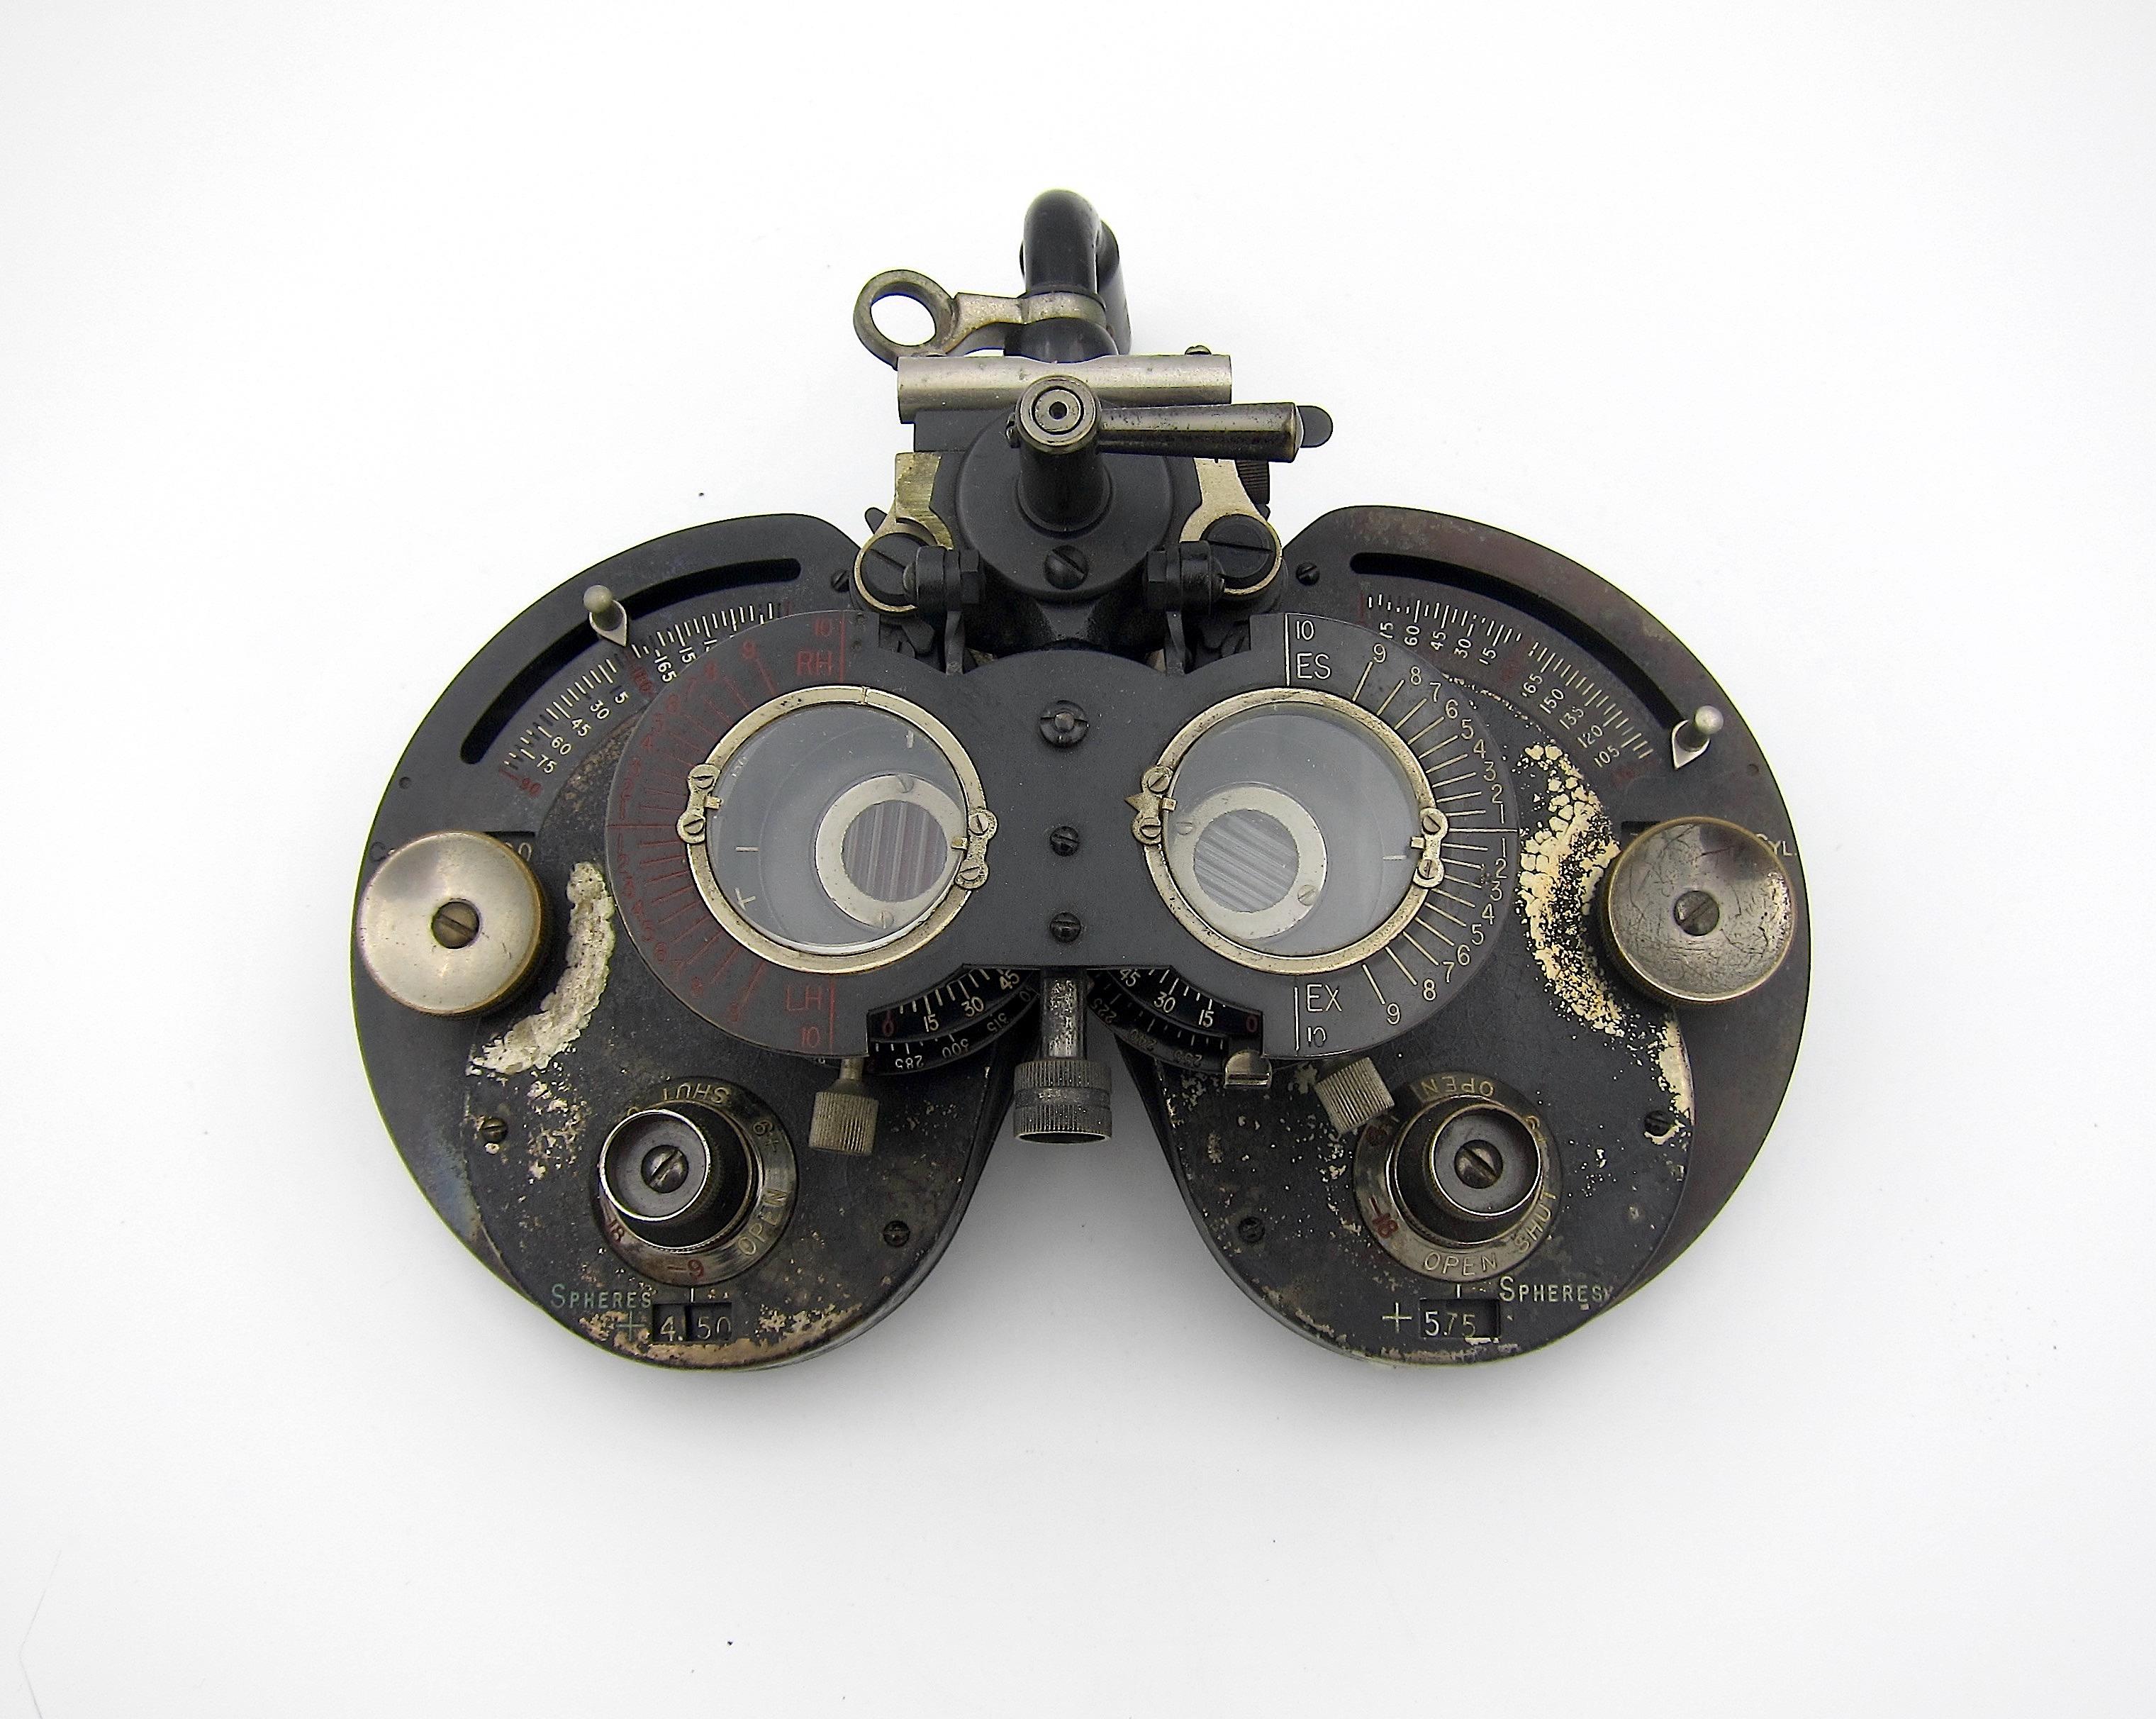 An early 20th century American vision testing device called a phoropter, an ophthalmic instrument patented in 1917 as a Genothalmic Refractor. A phoropter is a binocular refracting instrument containing a variety of convex and concave lenses used by